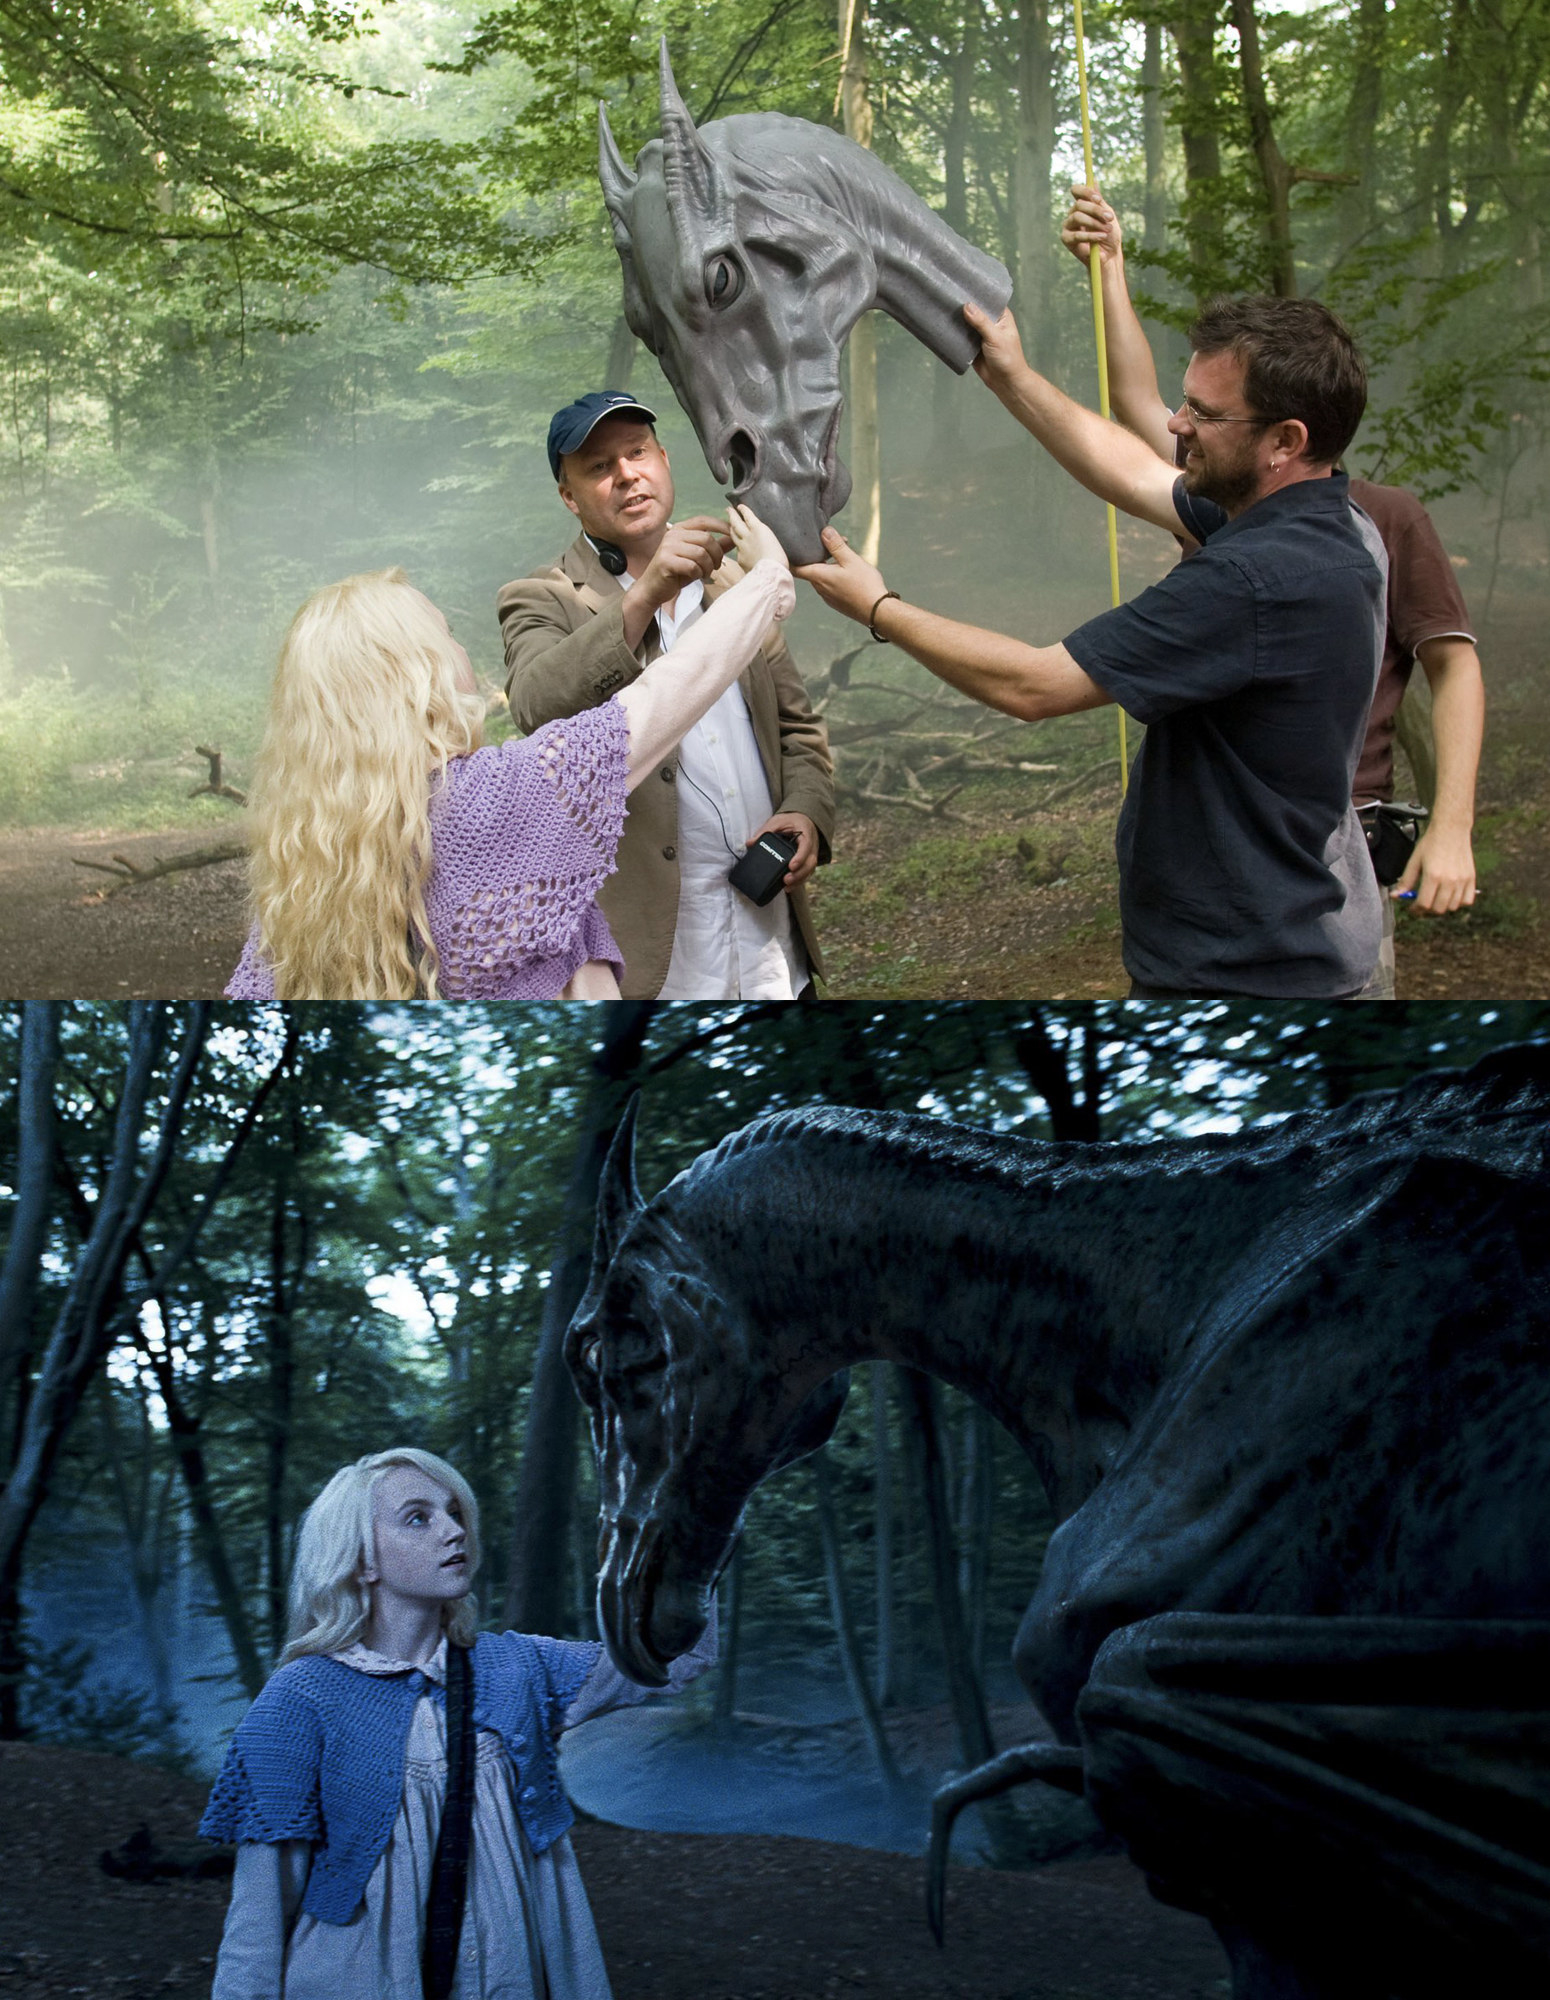 How were the magical creatures and characters created using CGI in the Harry Potter movies? 2